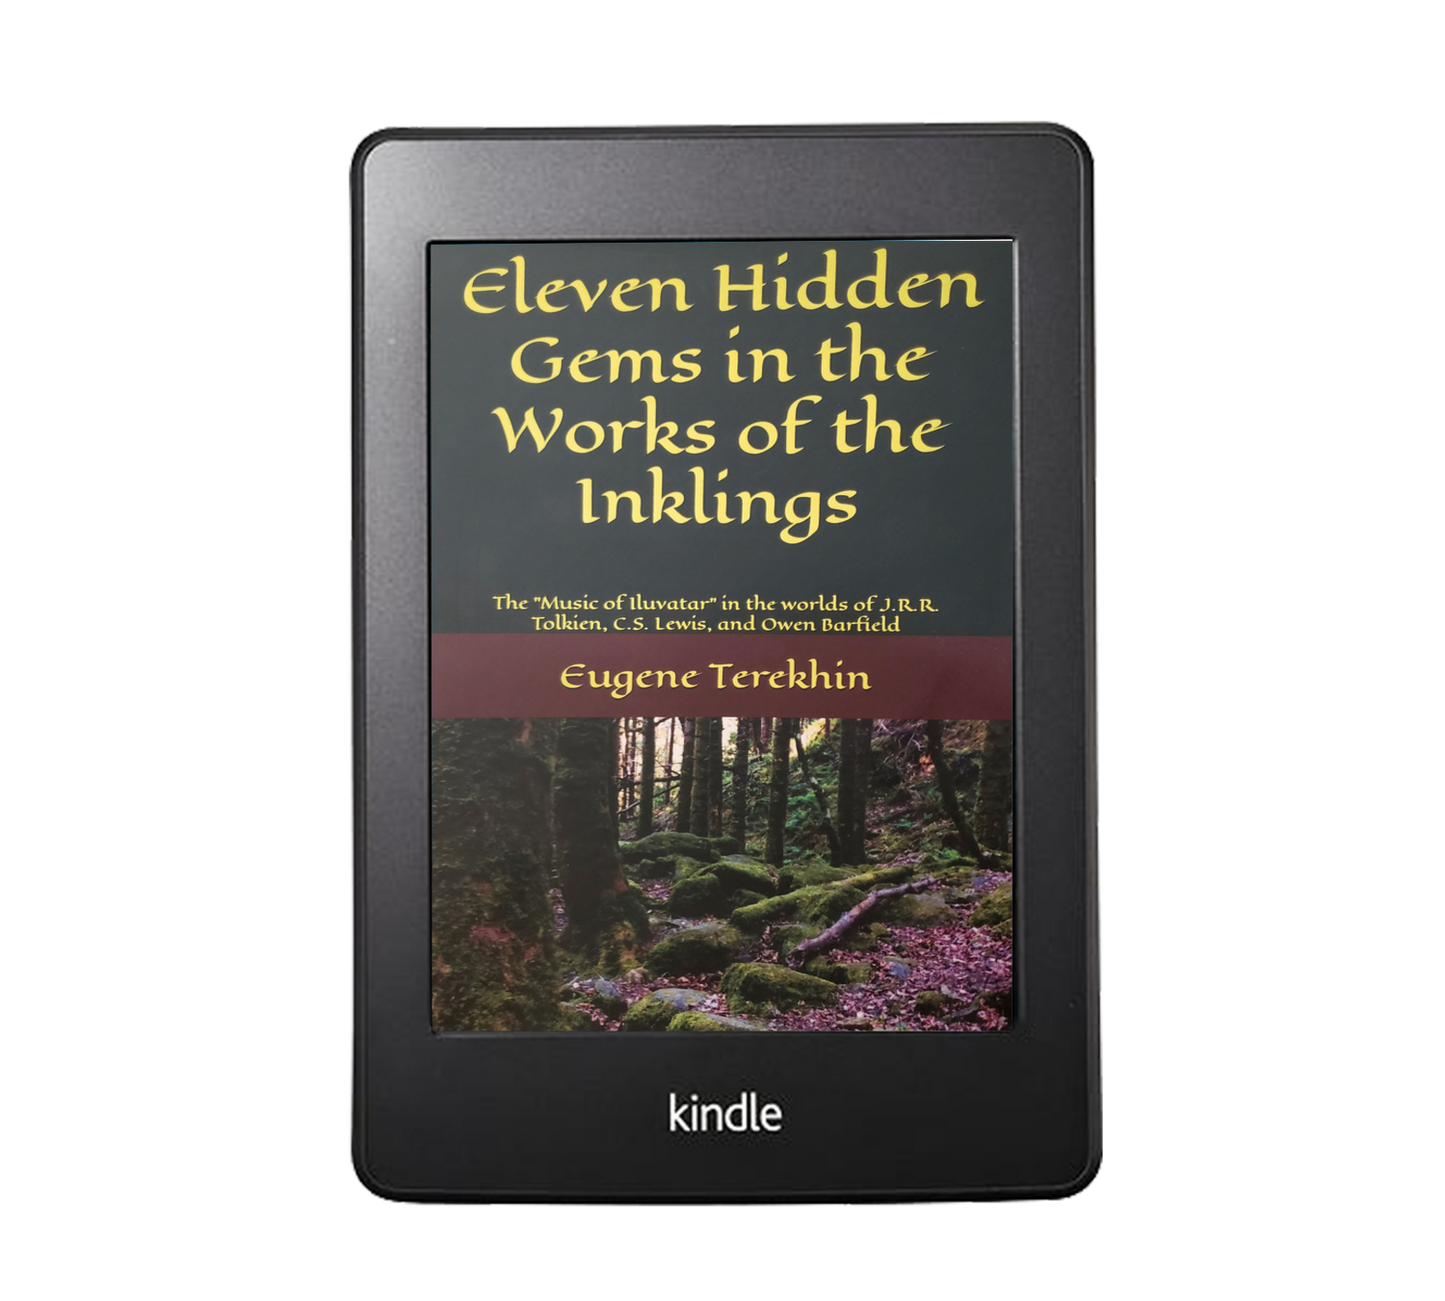 Eleven Hidden Gems in the Works of the Inklings: The Music of Iluvatar in the Worlds of J.R.R. Tolkien, C.S. Lewis, and Owen Barfield (e-book)